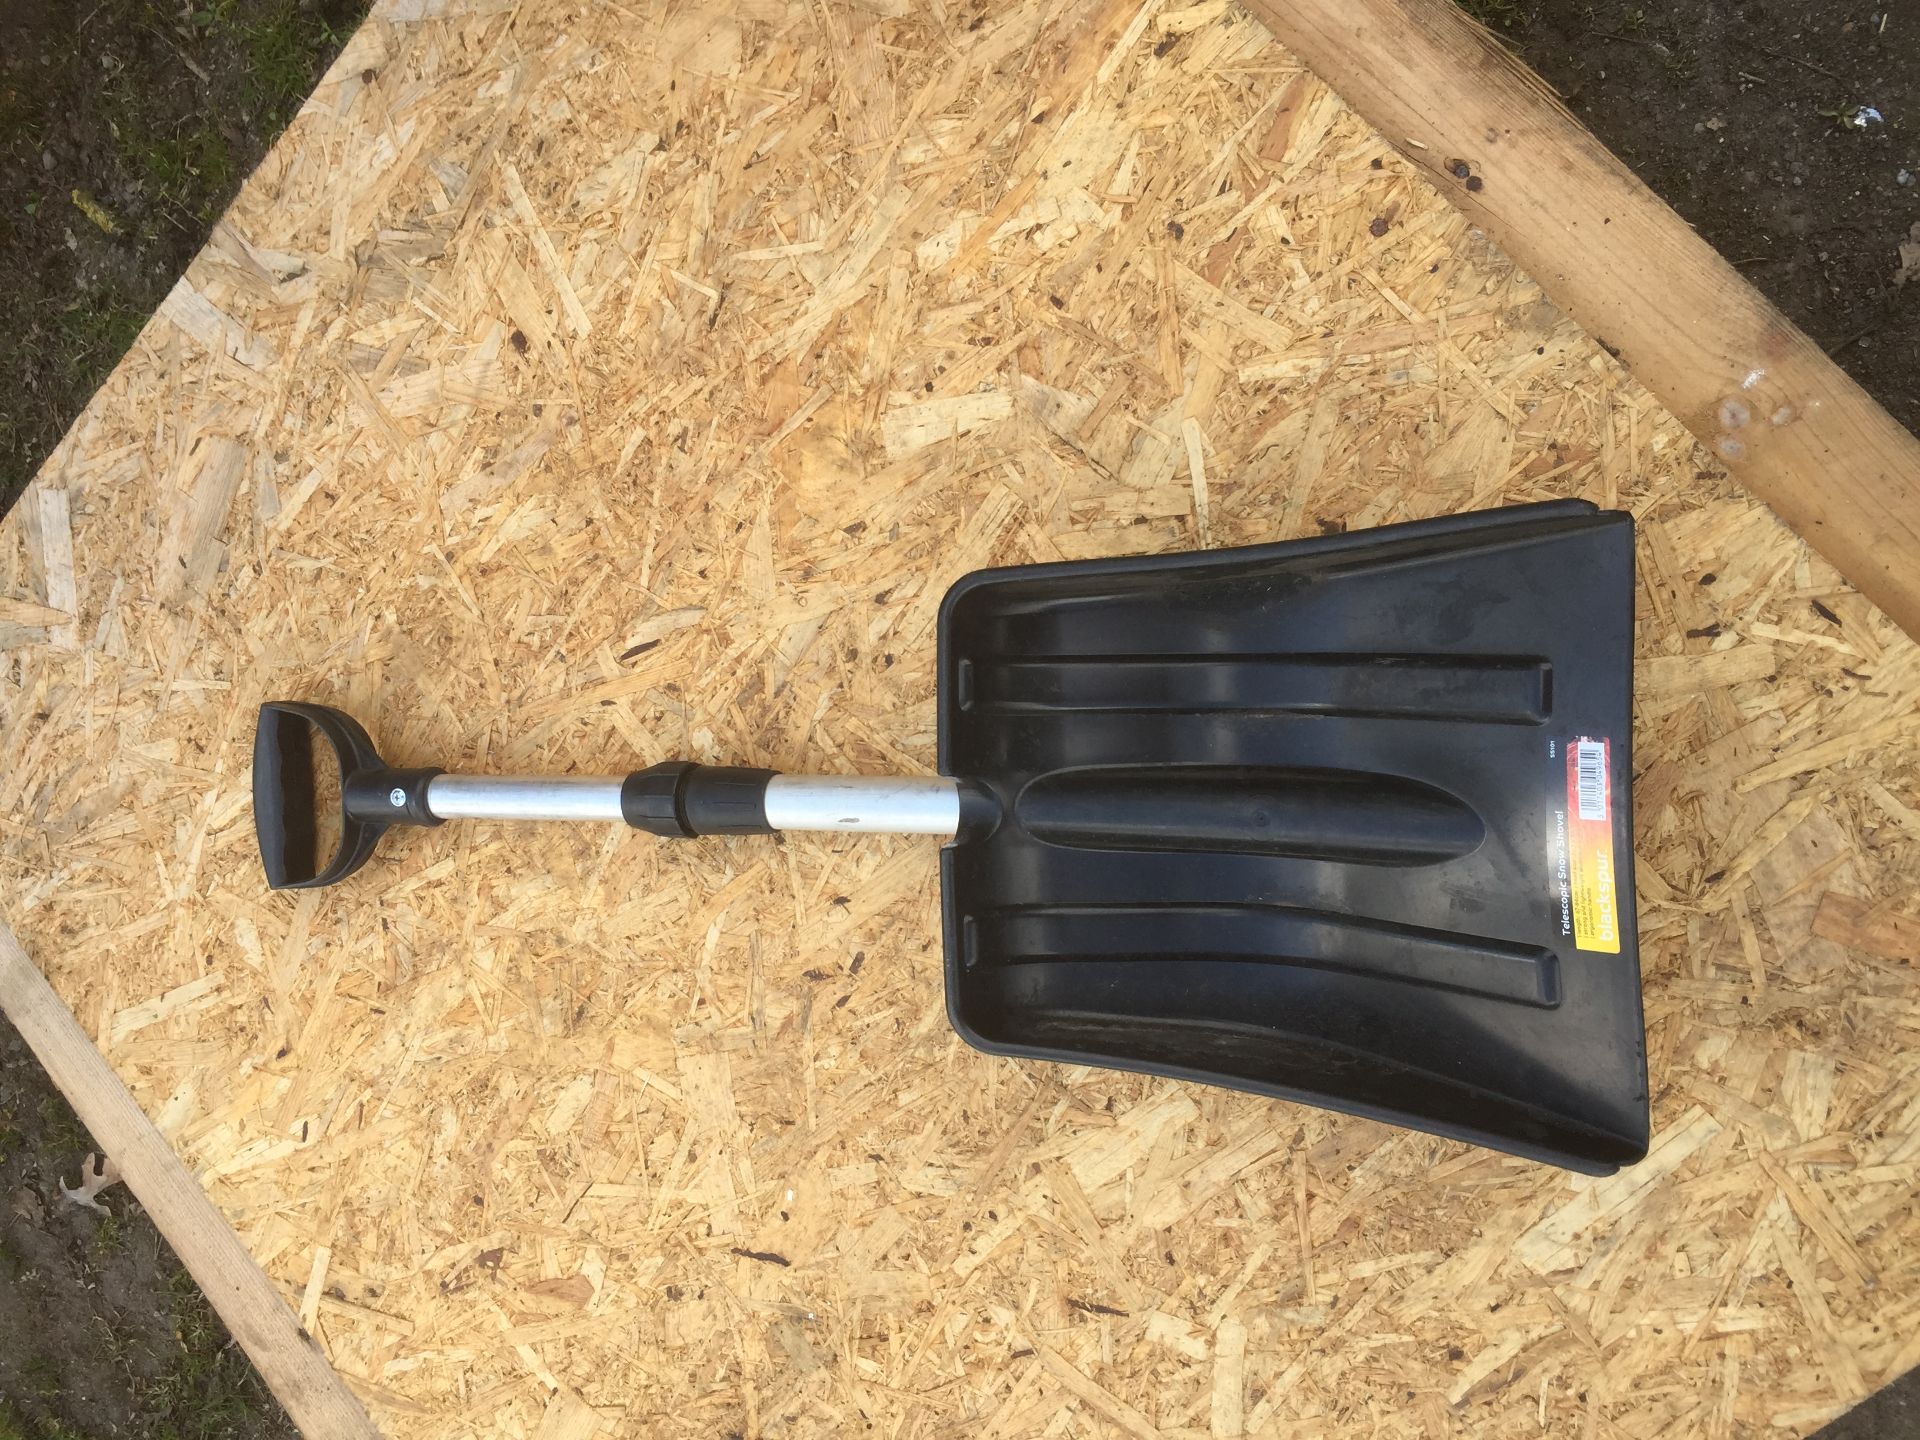 3 New And Unused Telescopic Handle Snow / Horse Manure Shovels